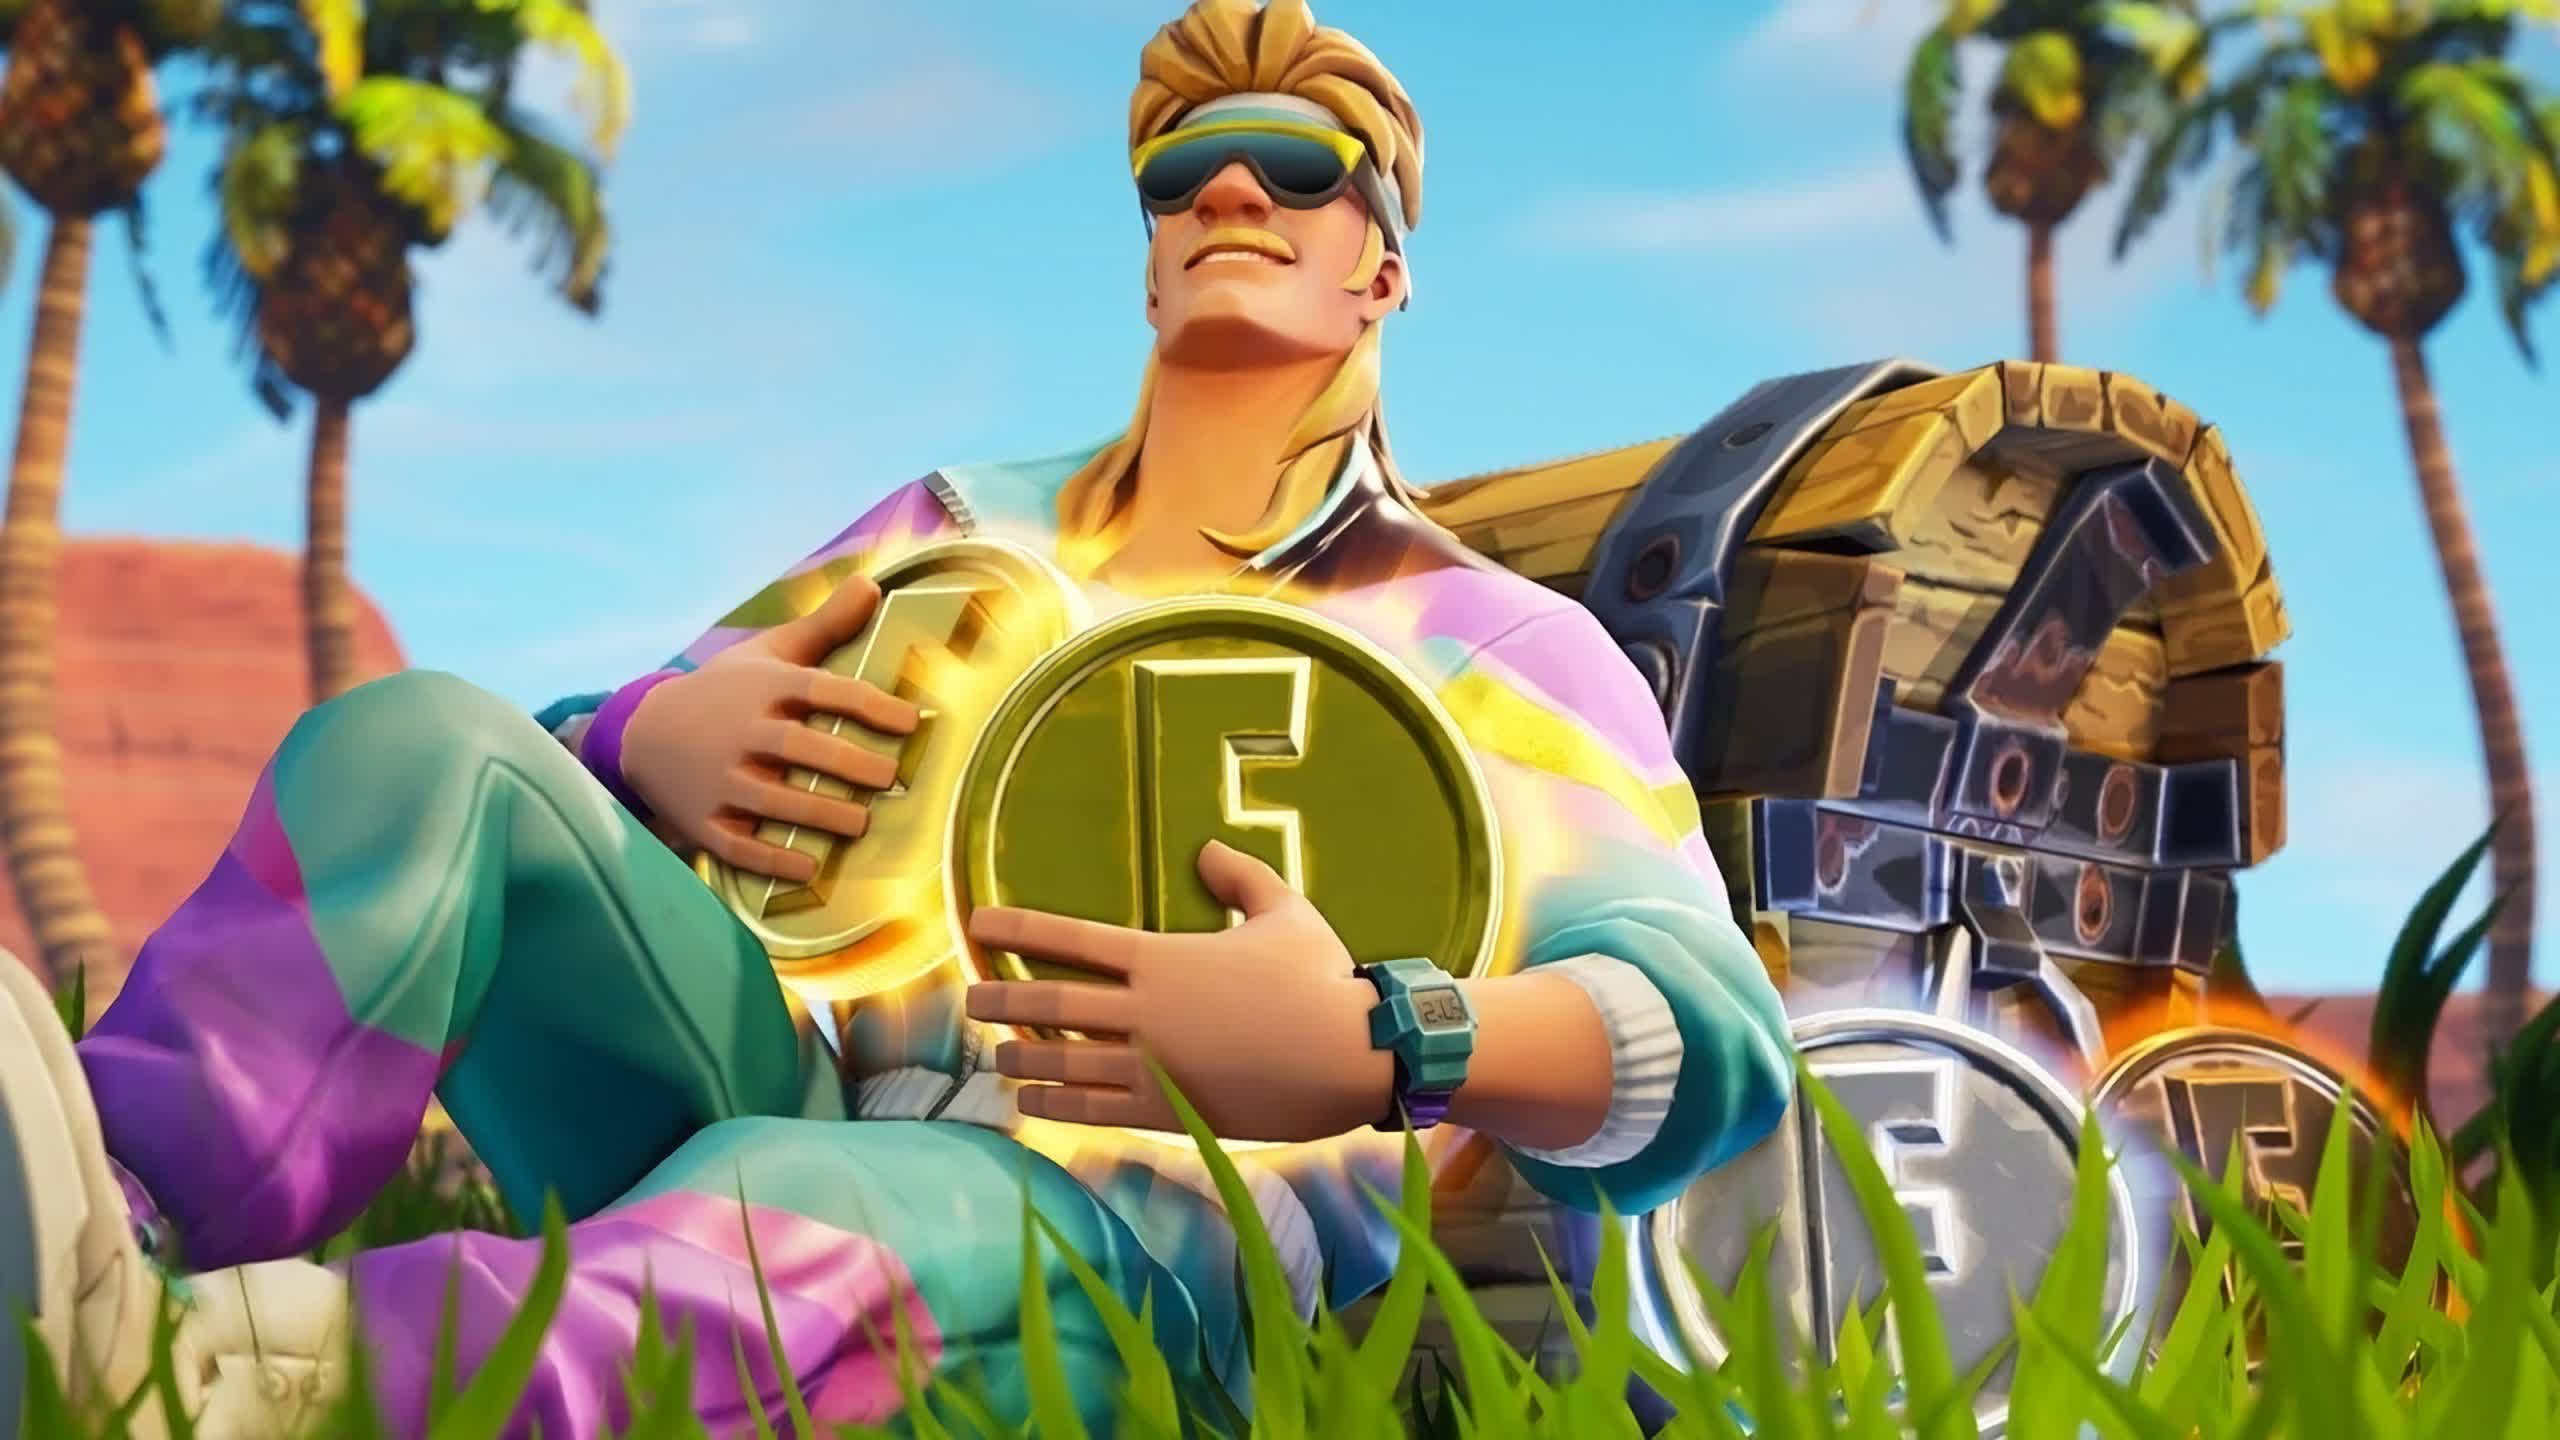 FTC ruling says Epic Games used deceptive practices to trick users into unwanted purchases